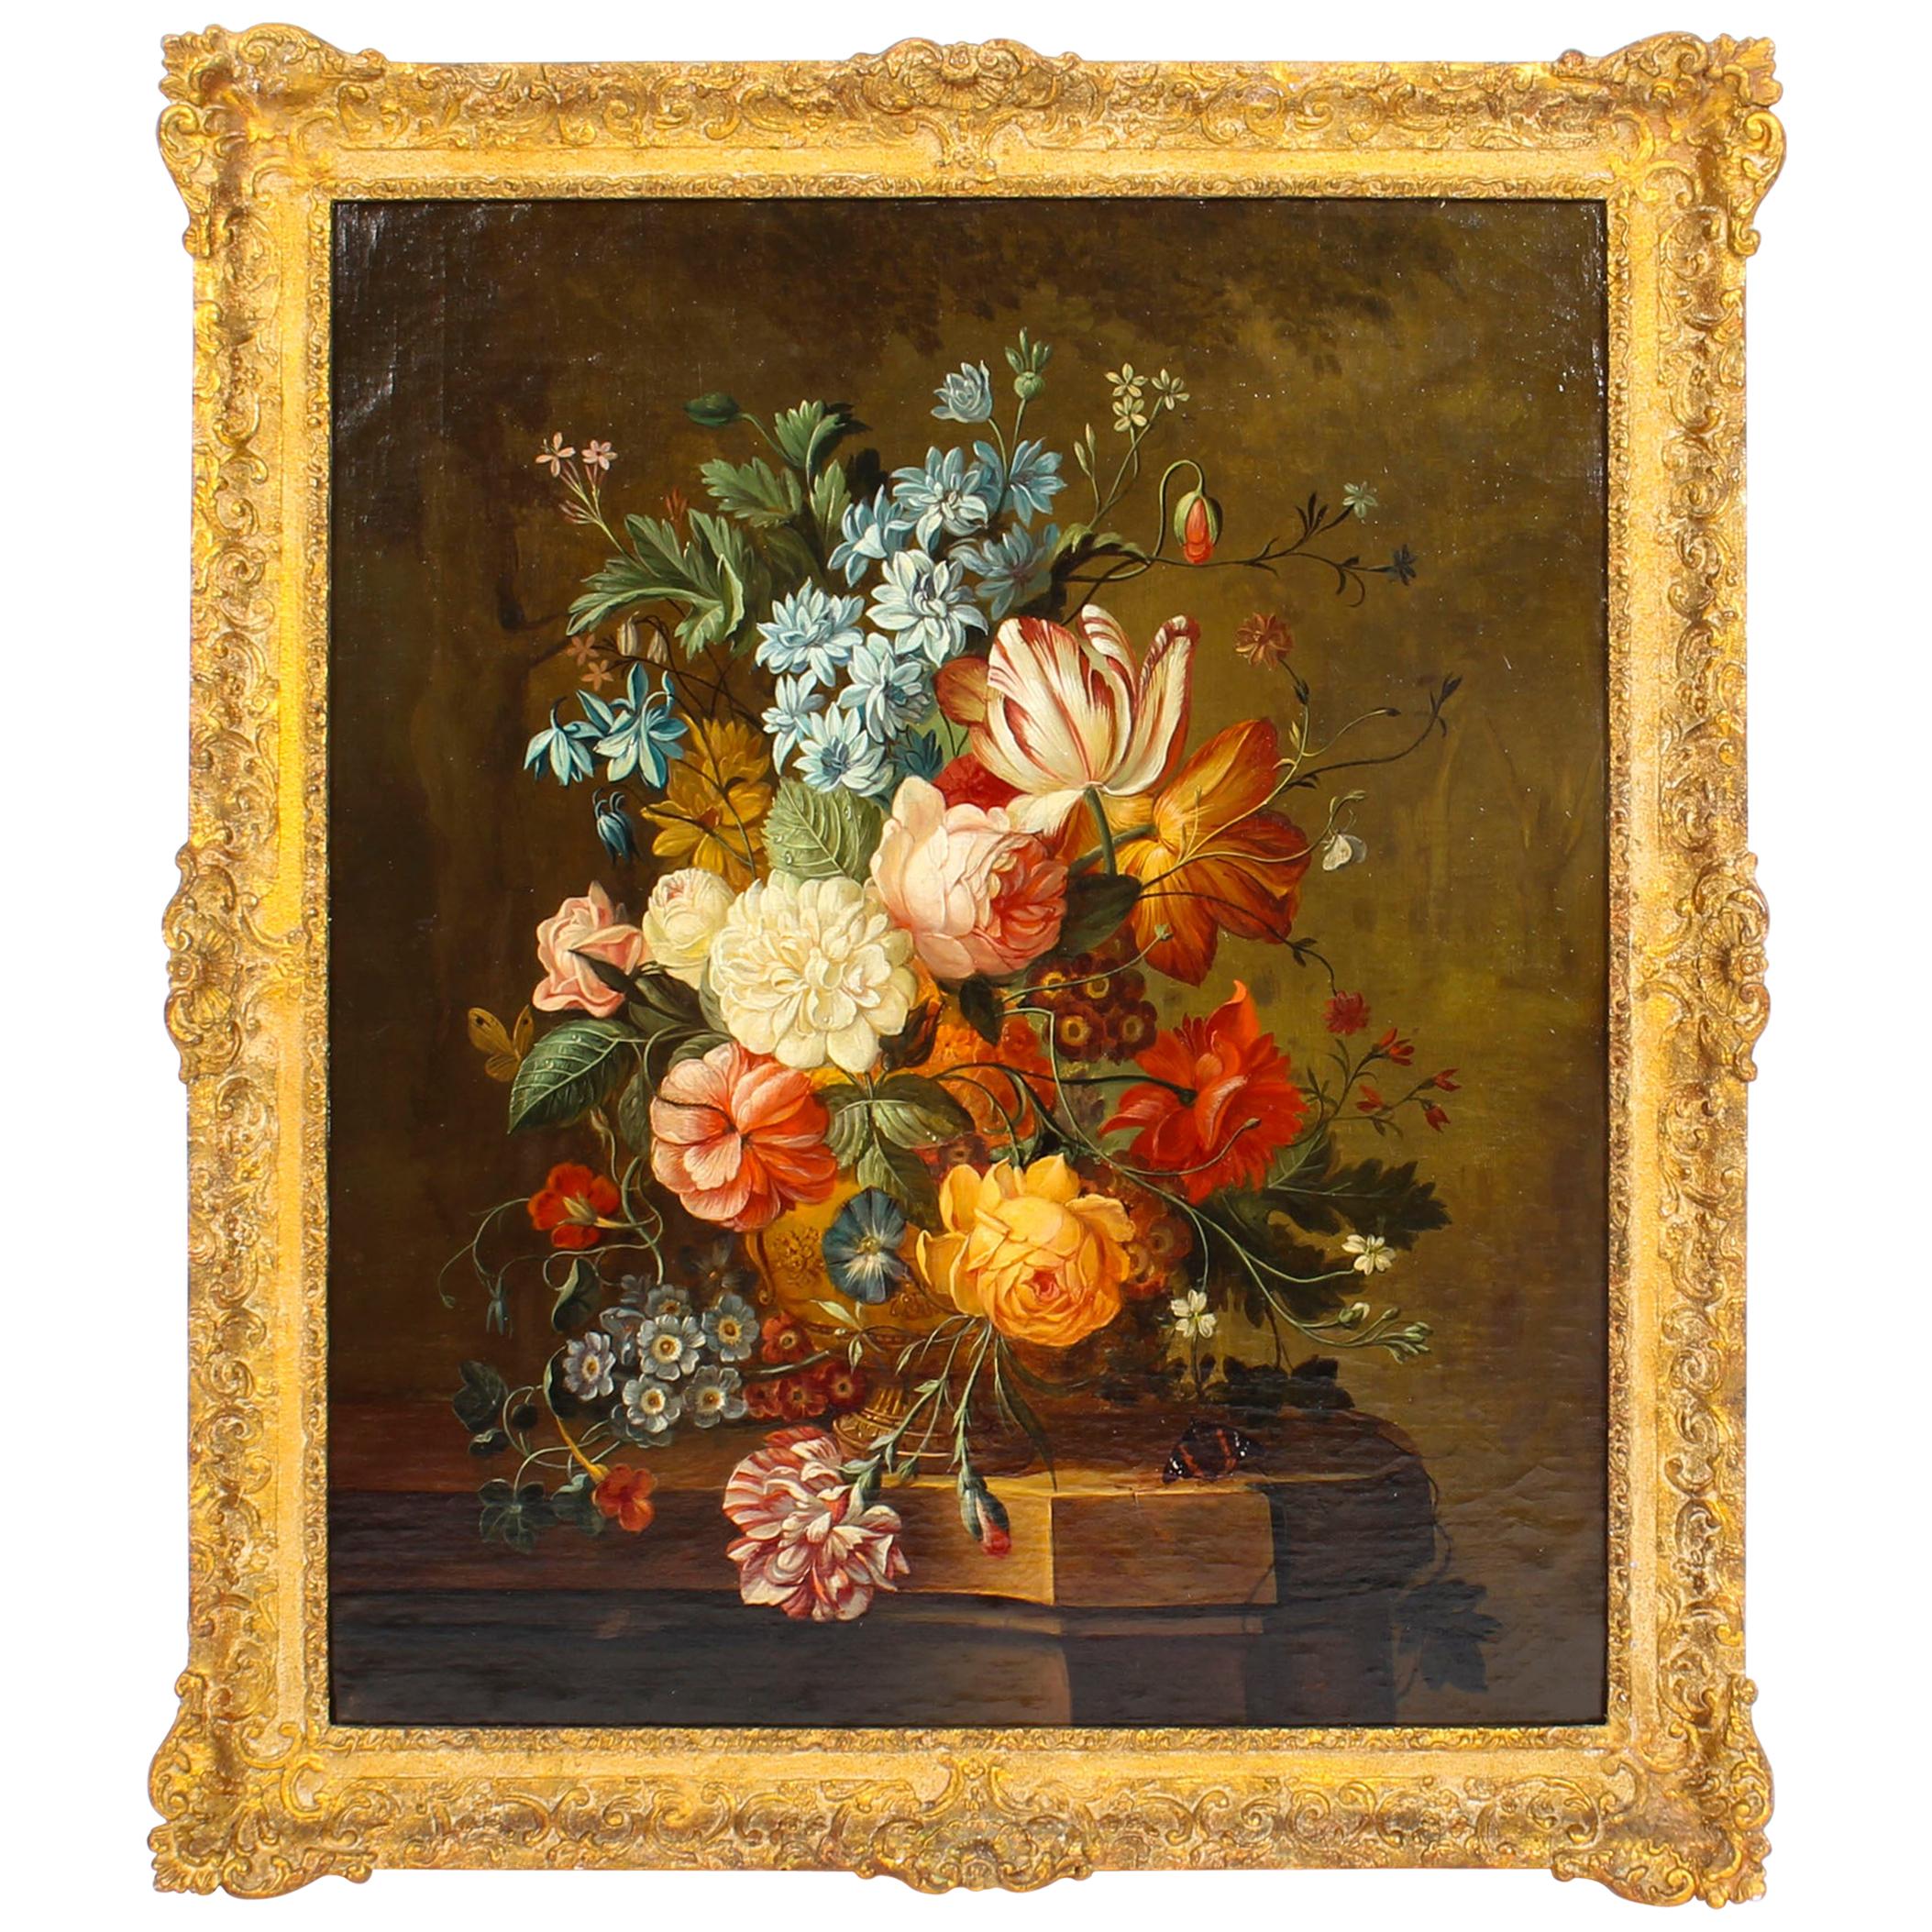 Antique Dutch School Floral Still Life Oil Painting Framed, Late 18th Century